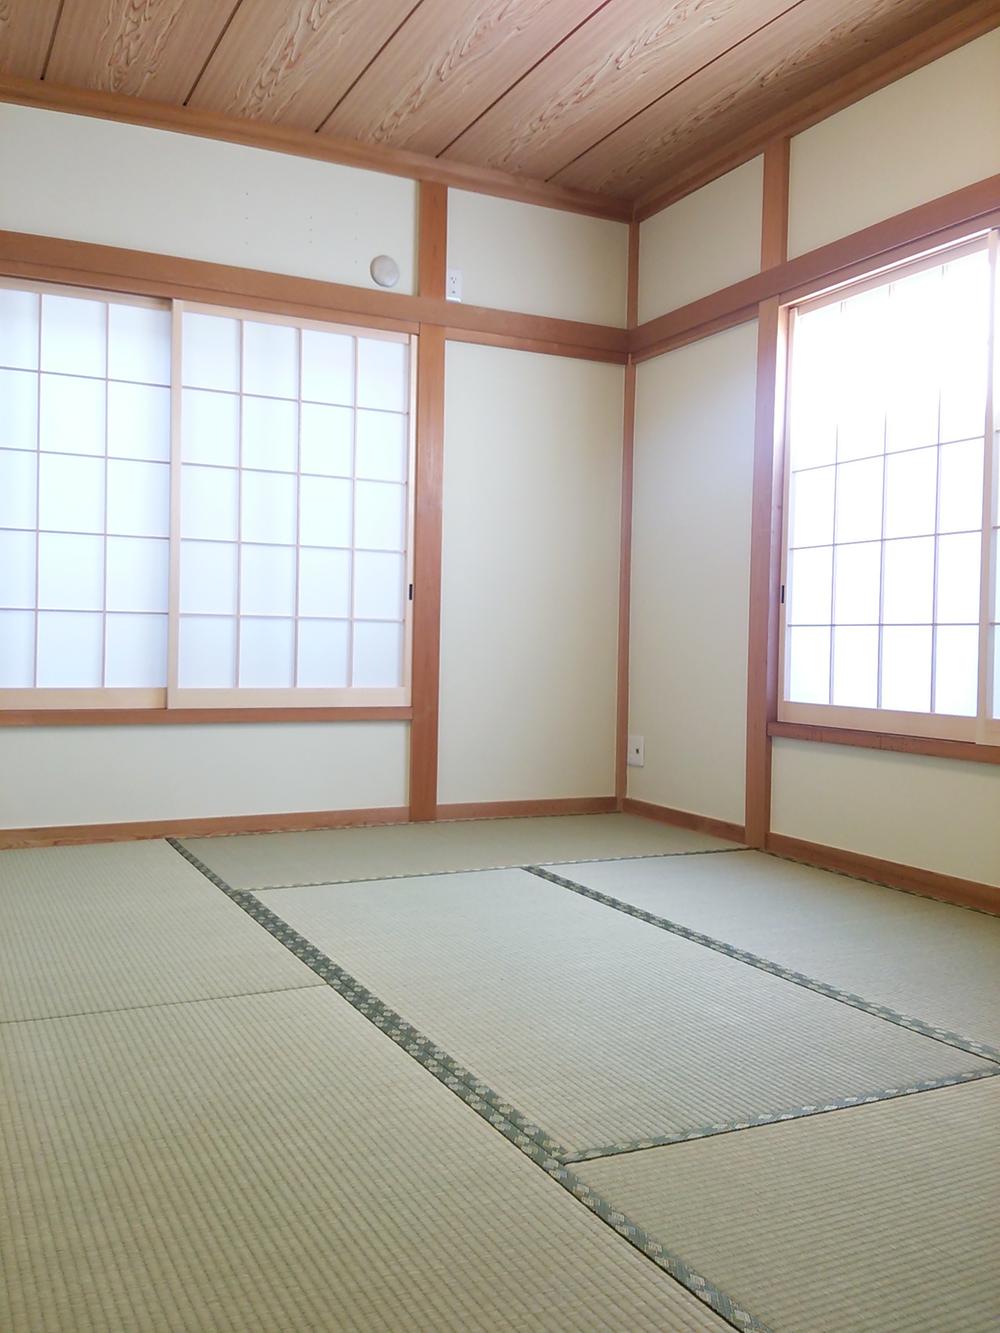 Non-living room. It is the second floor of a Japanese-style room